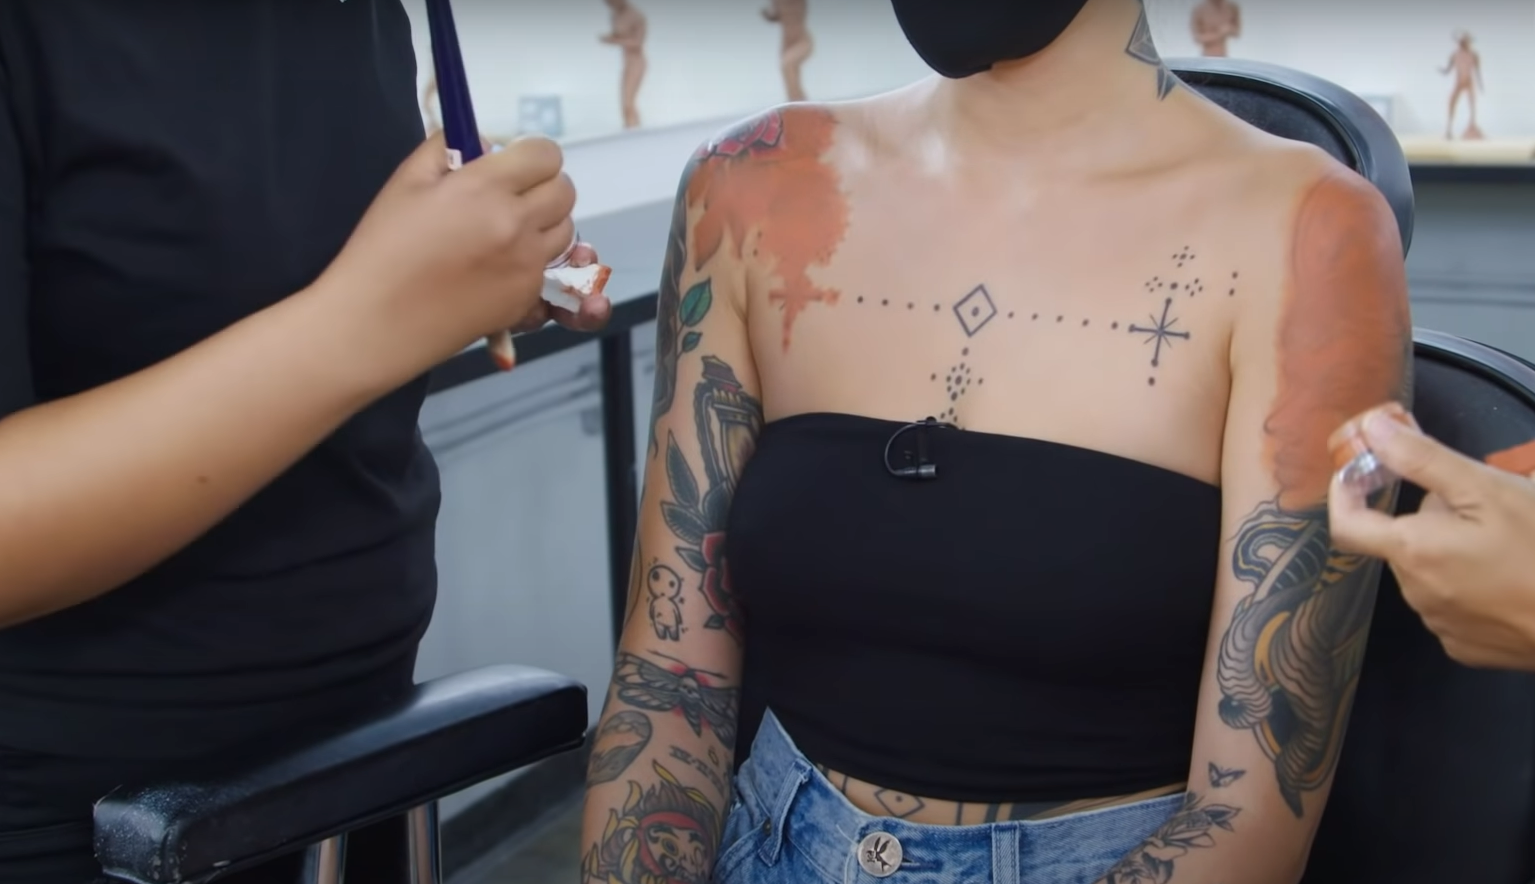 Tips for Getting the Best Results When Covering Up Your Tattoos with Makeup